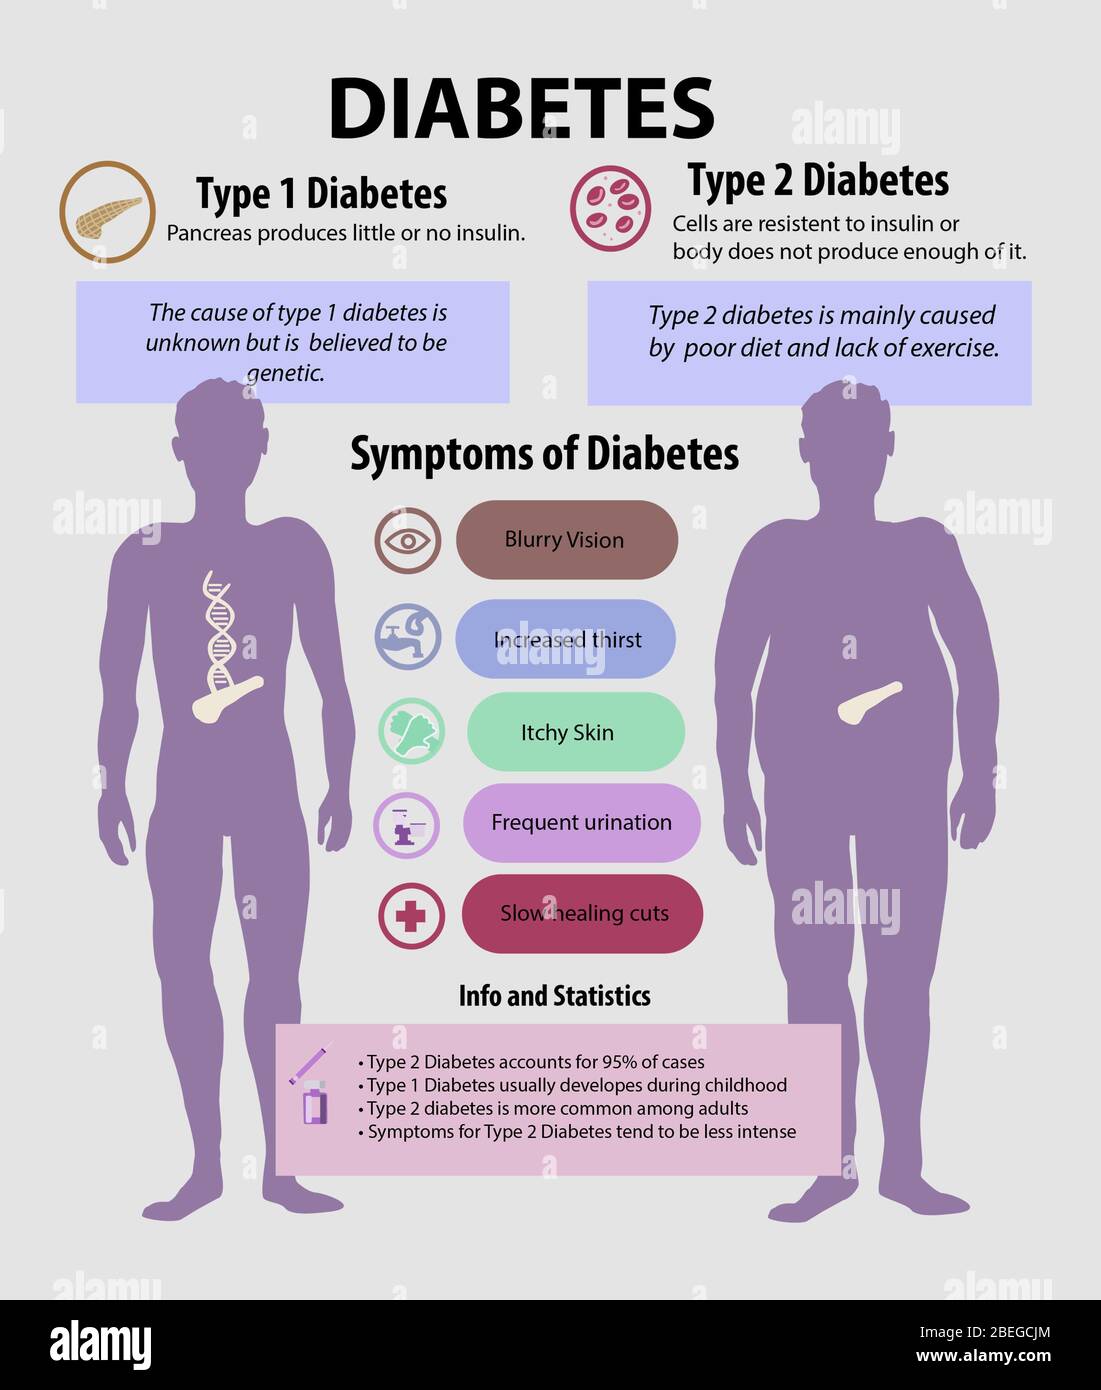 Infographic describing types of diabetes, their symptoms and other facts about the disease. Stock Photo